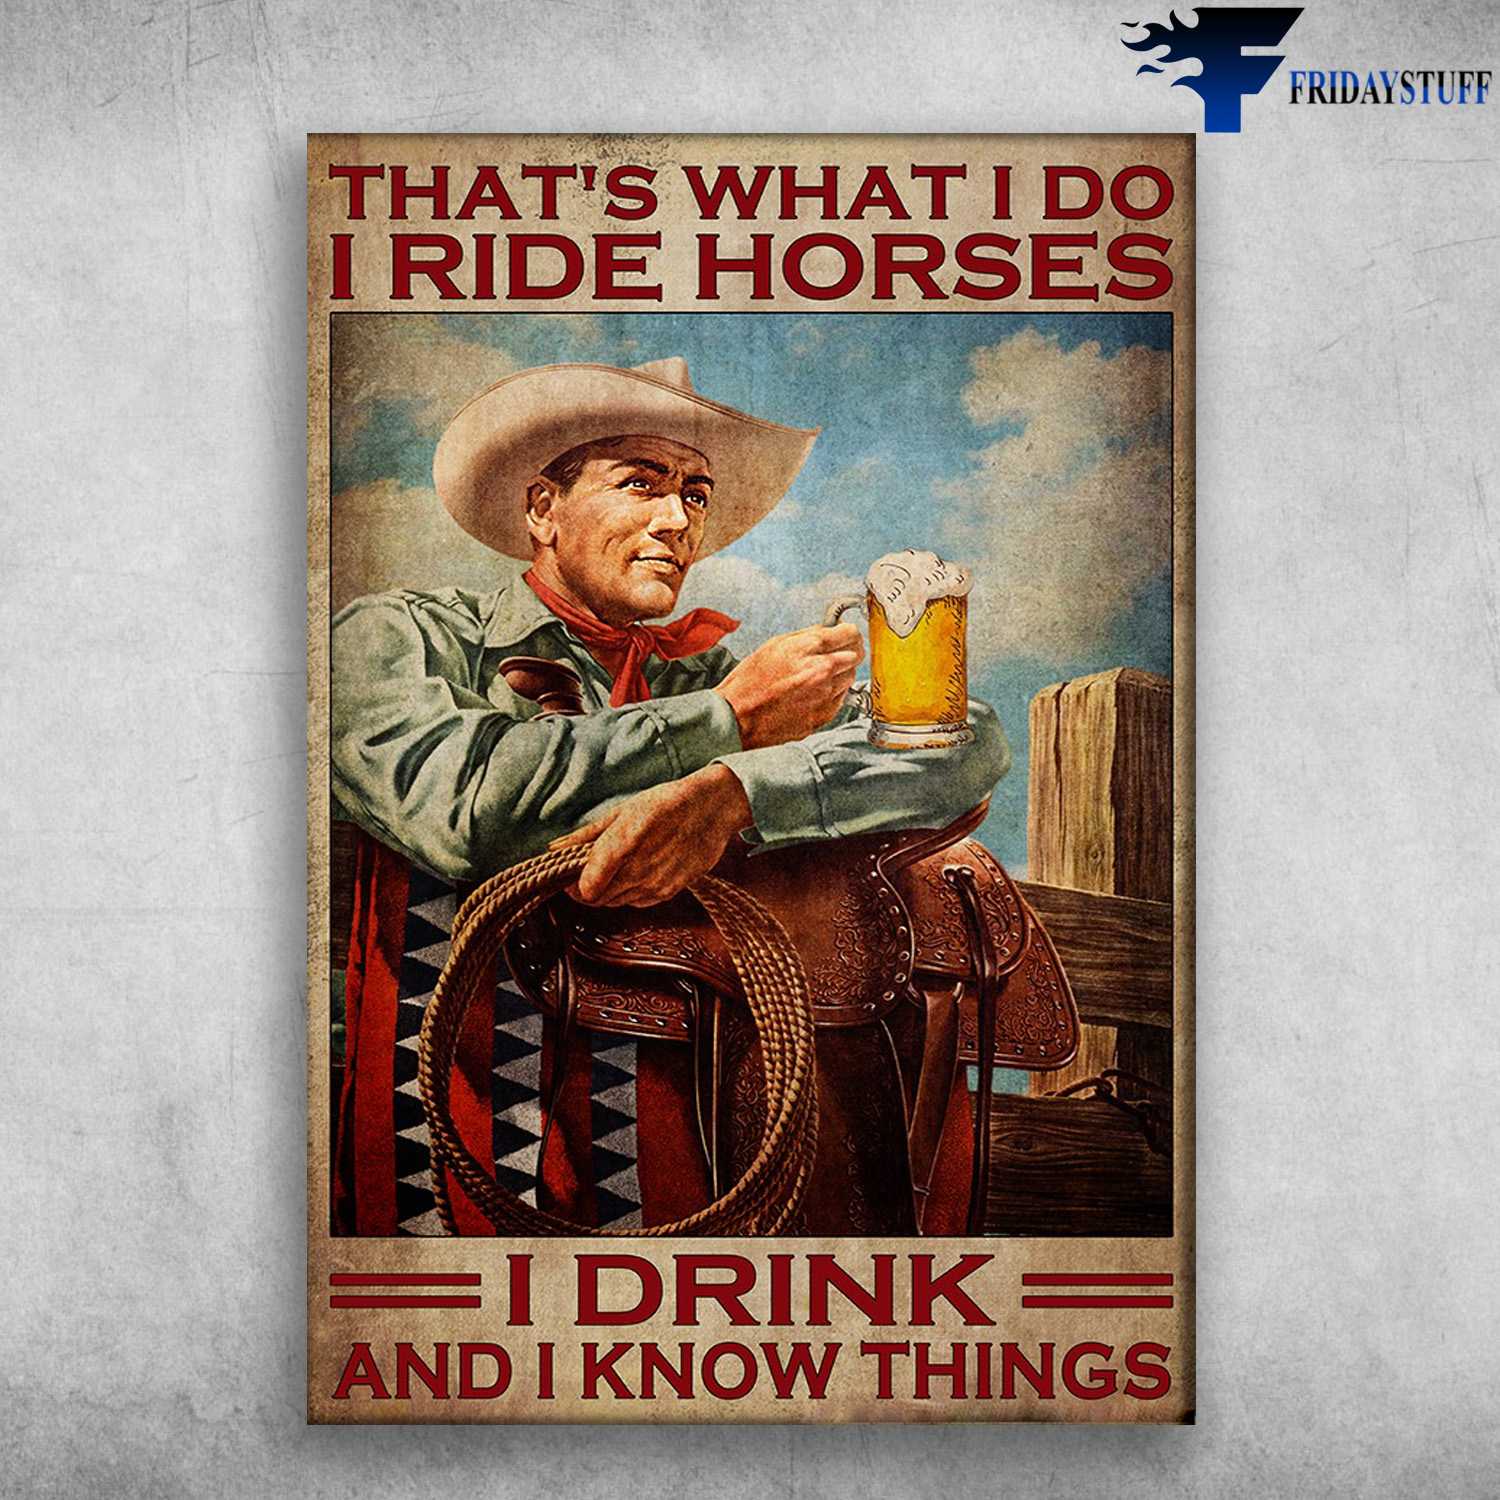 Cowboy Drink Beer - That's What I Do, I Ride Horse, I Drink, And I Know Things